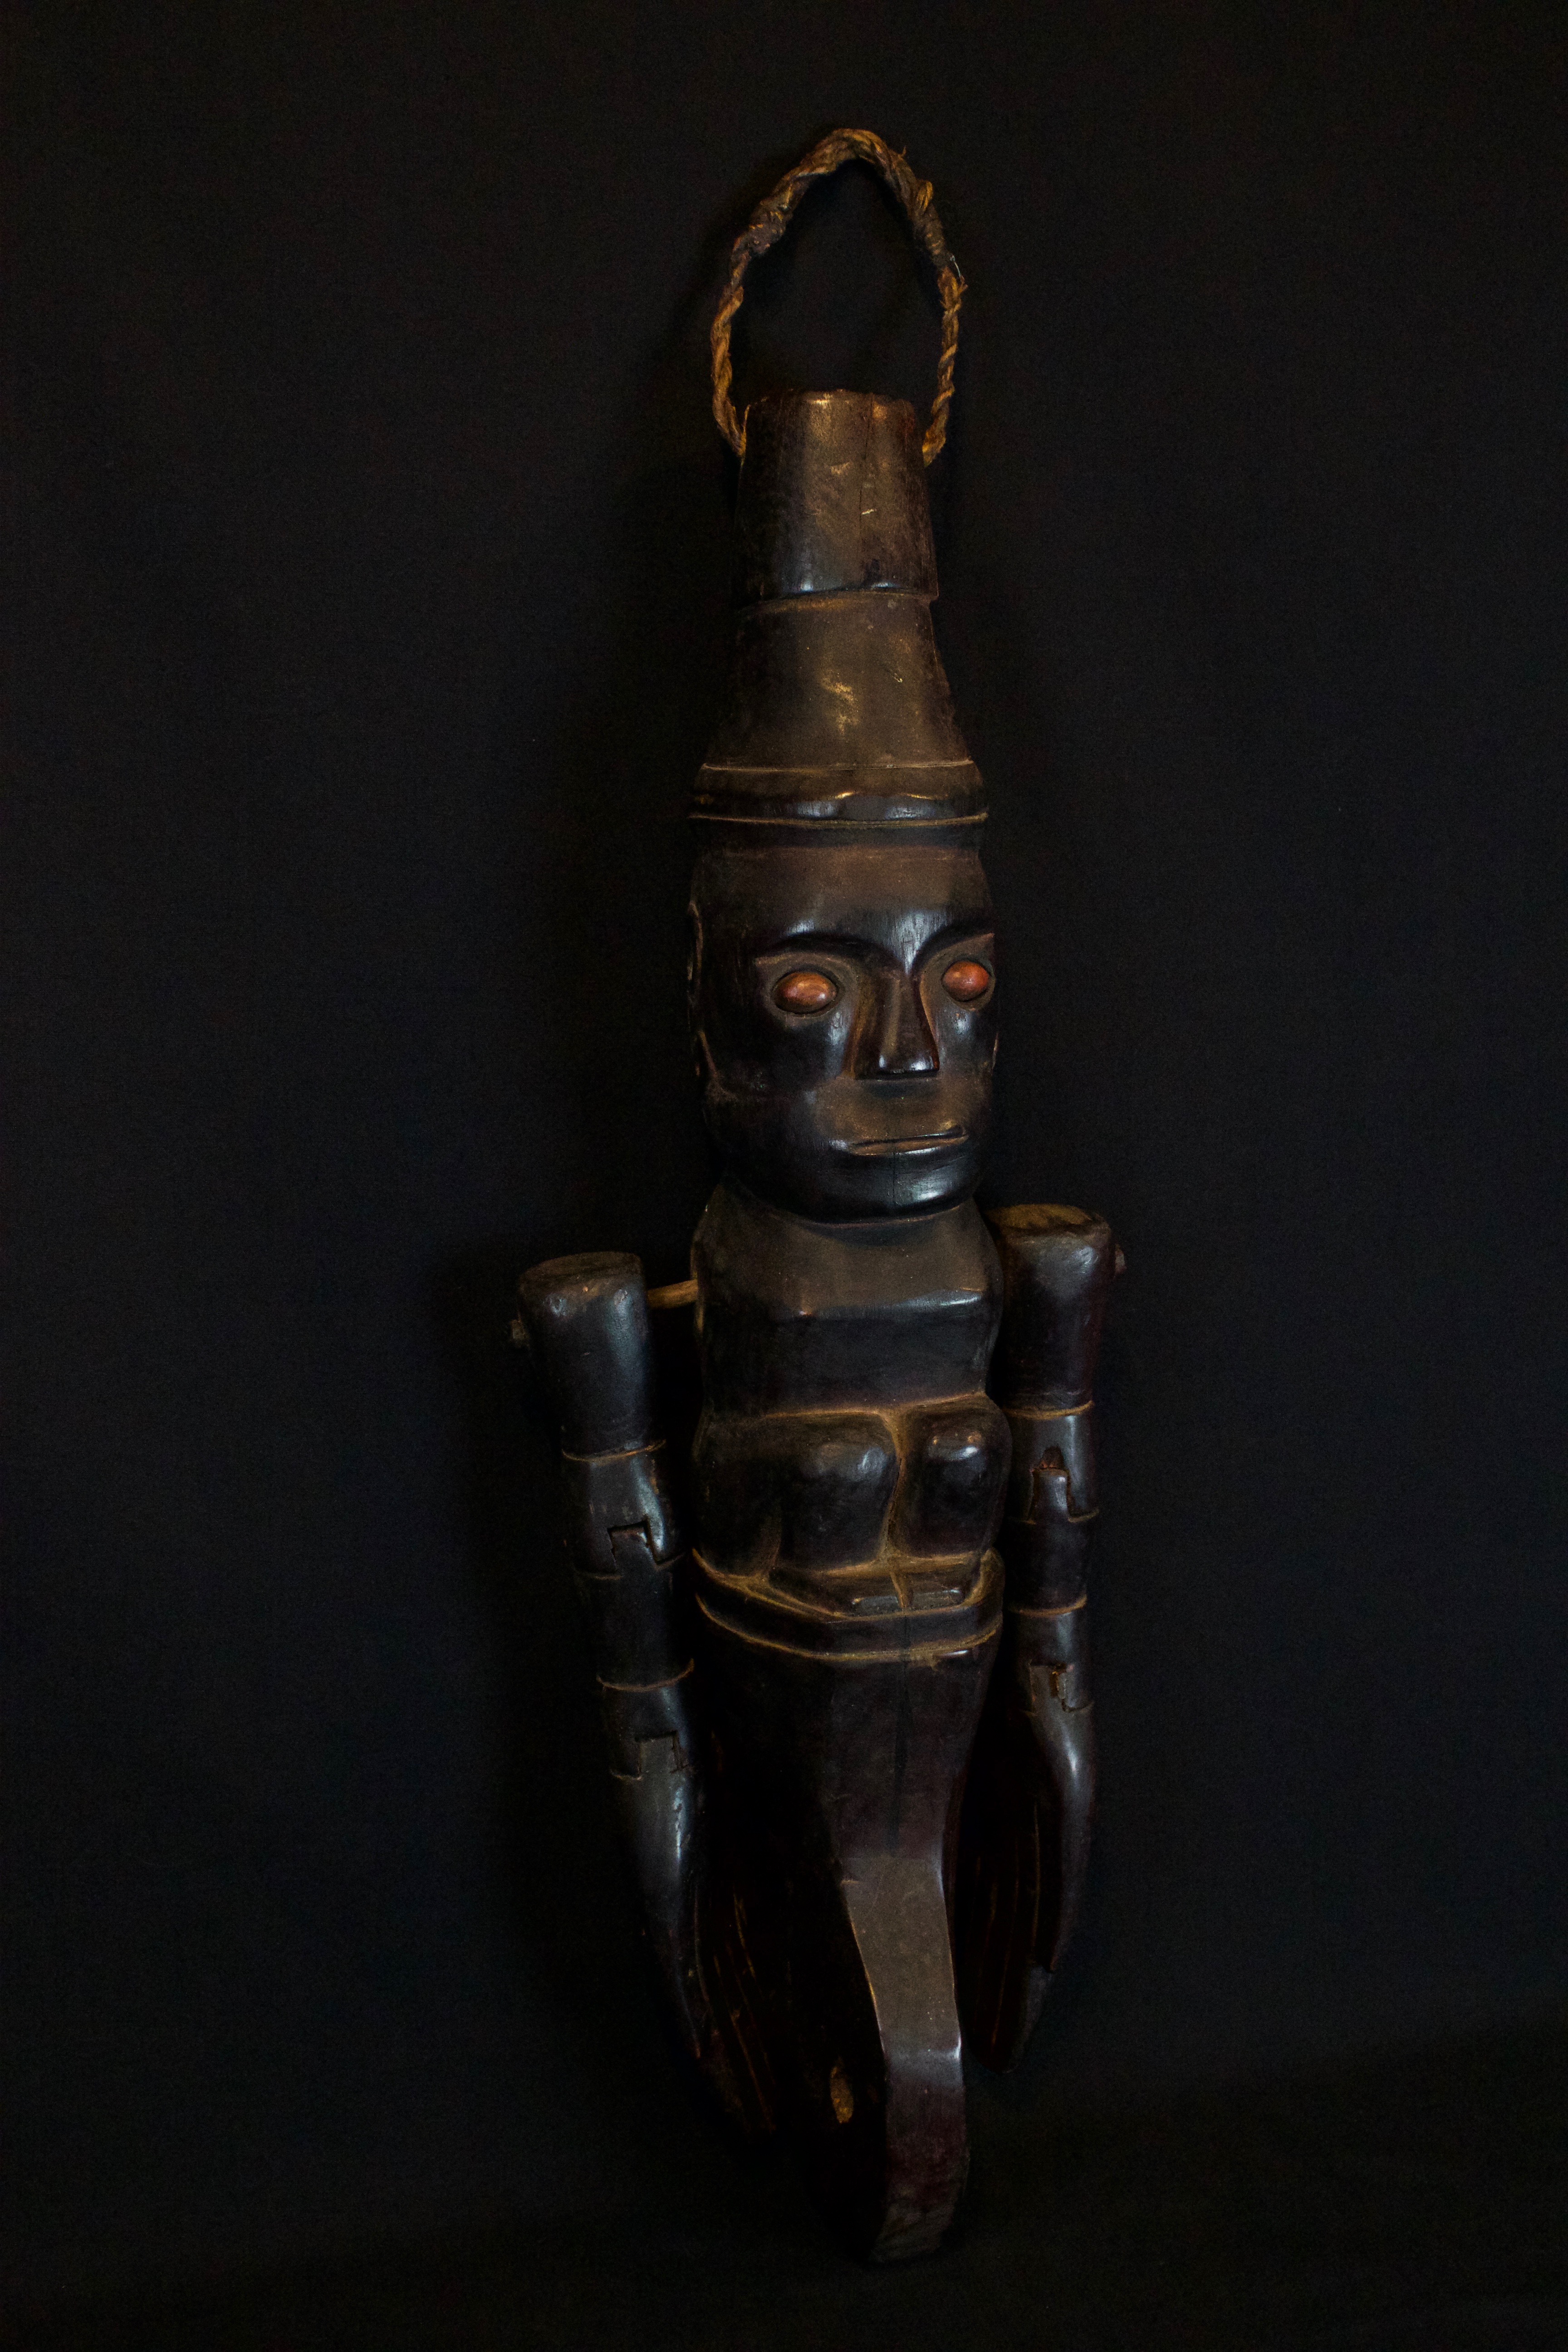 Shaman Divining Effigy, Sumatra, Indonesia, Karo village, Batak tribe, Late 19th c, Wood, pigment, fiber cord, smooth patina from use and age. Used to predict the future. 20” x 9” x 6”, $1450.